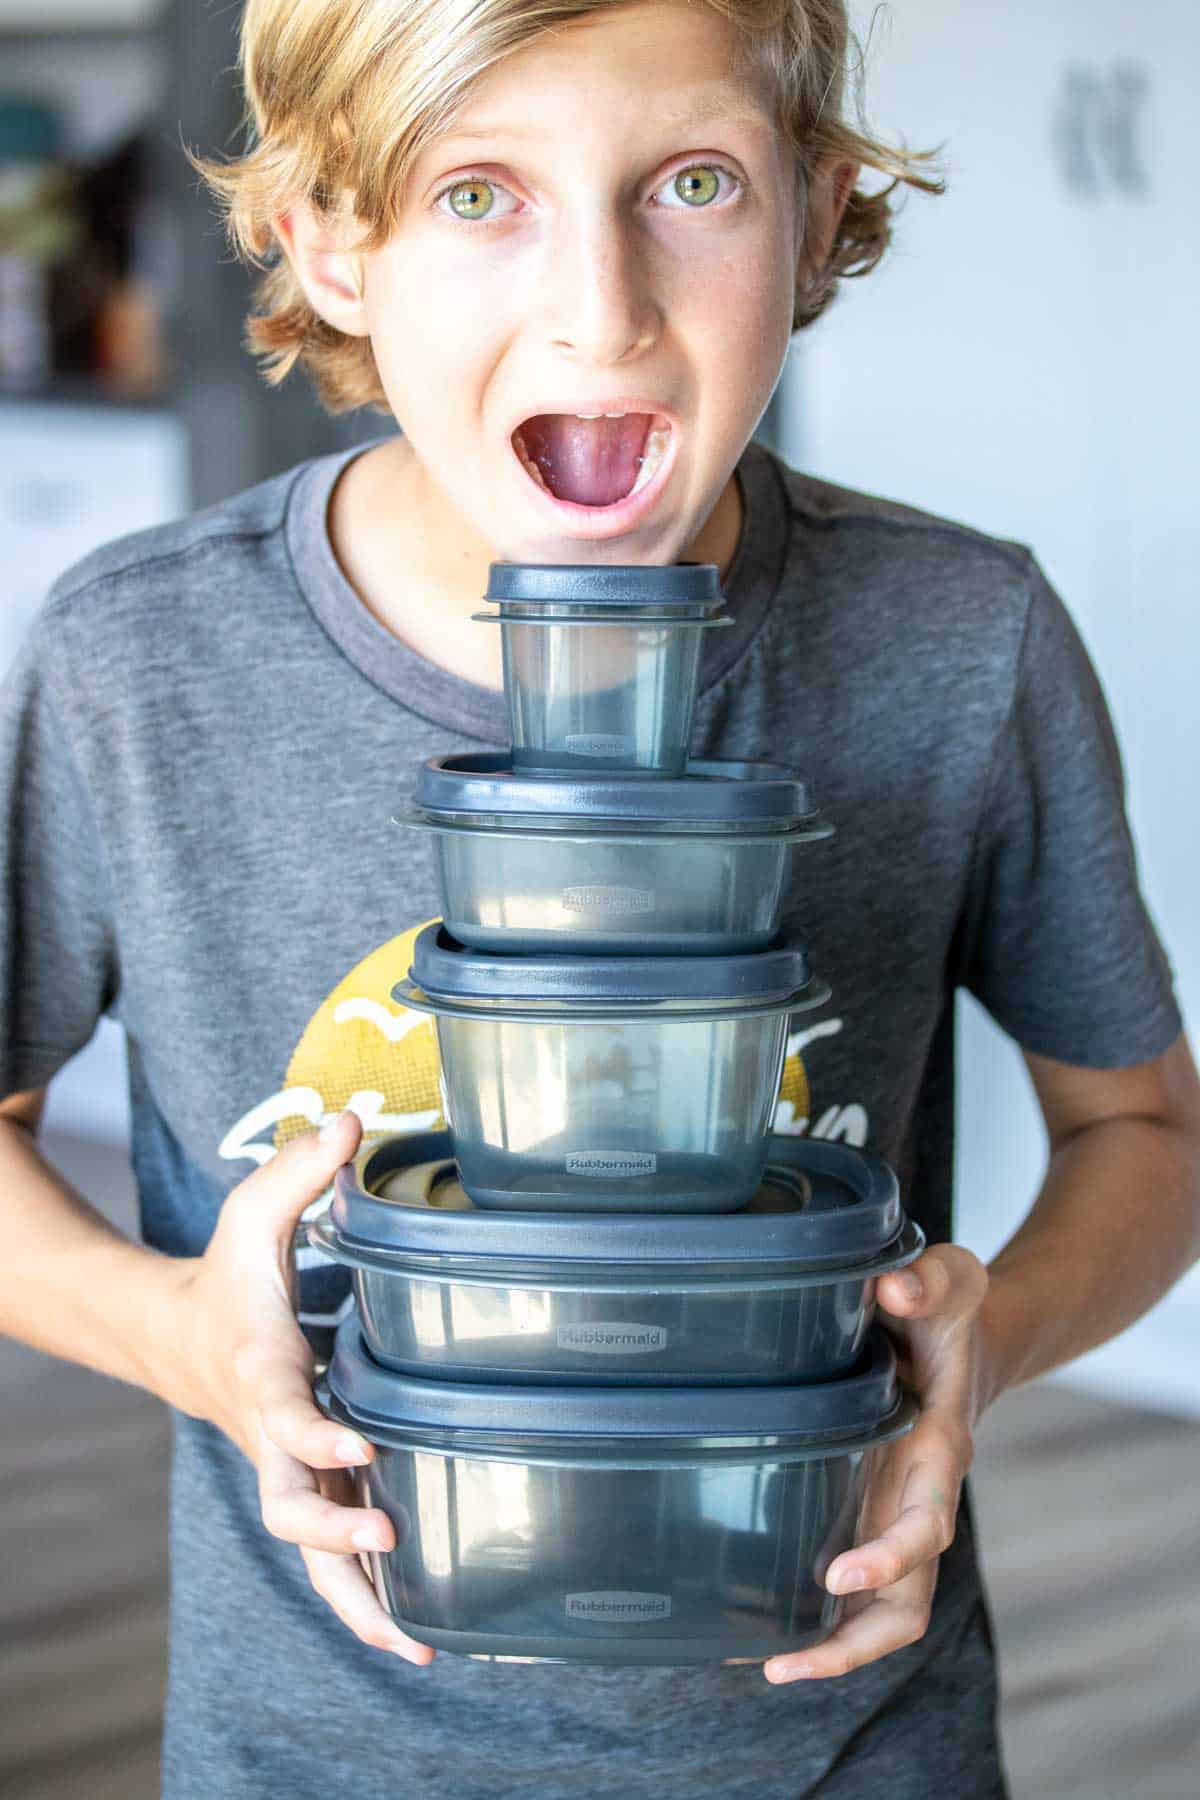 A boy with a shocked expression holding a stack of five different sized containers in size order in his hands.